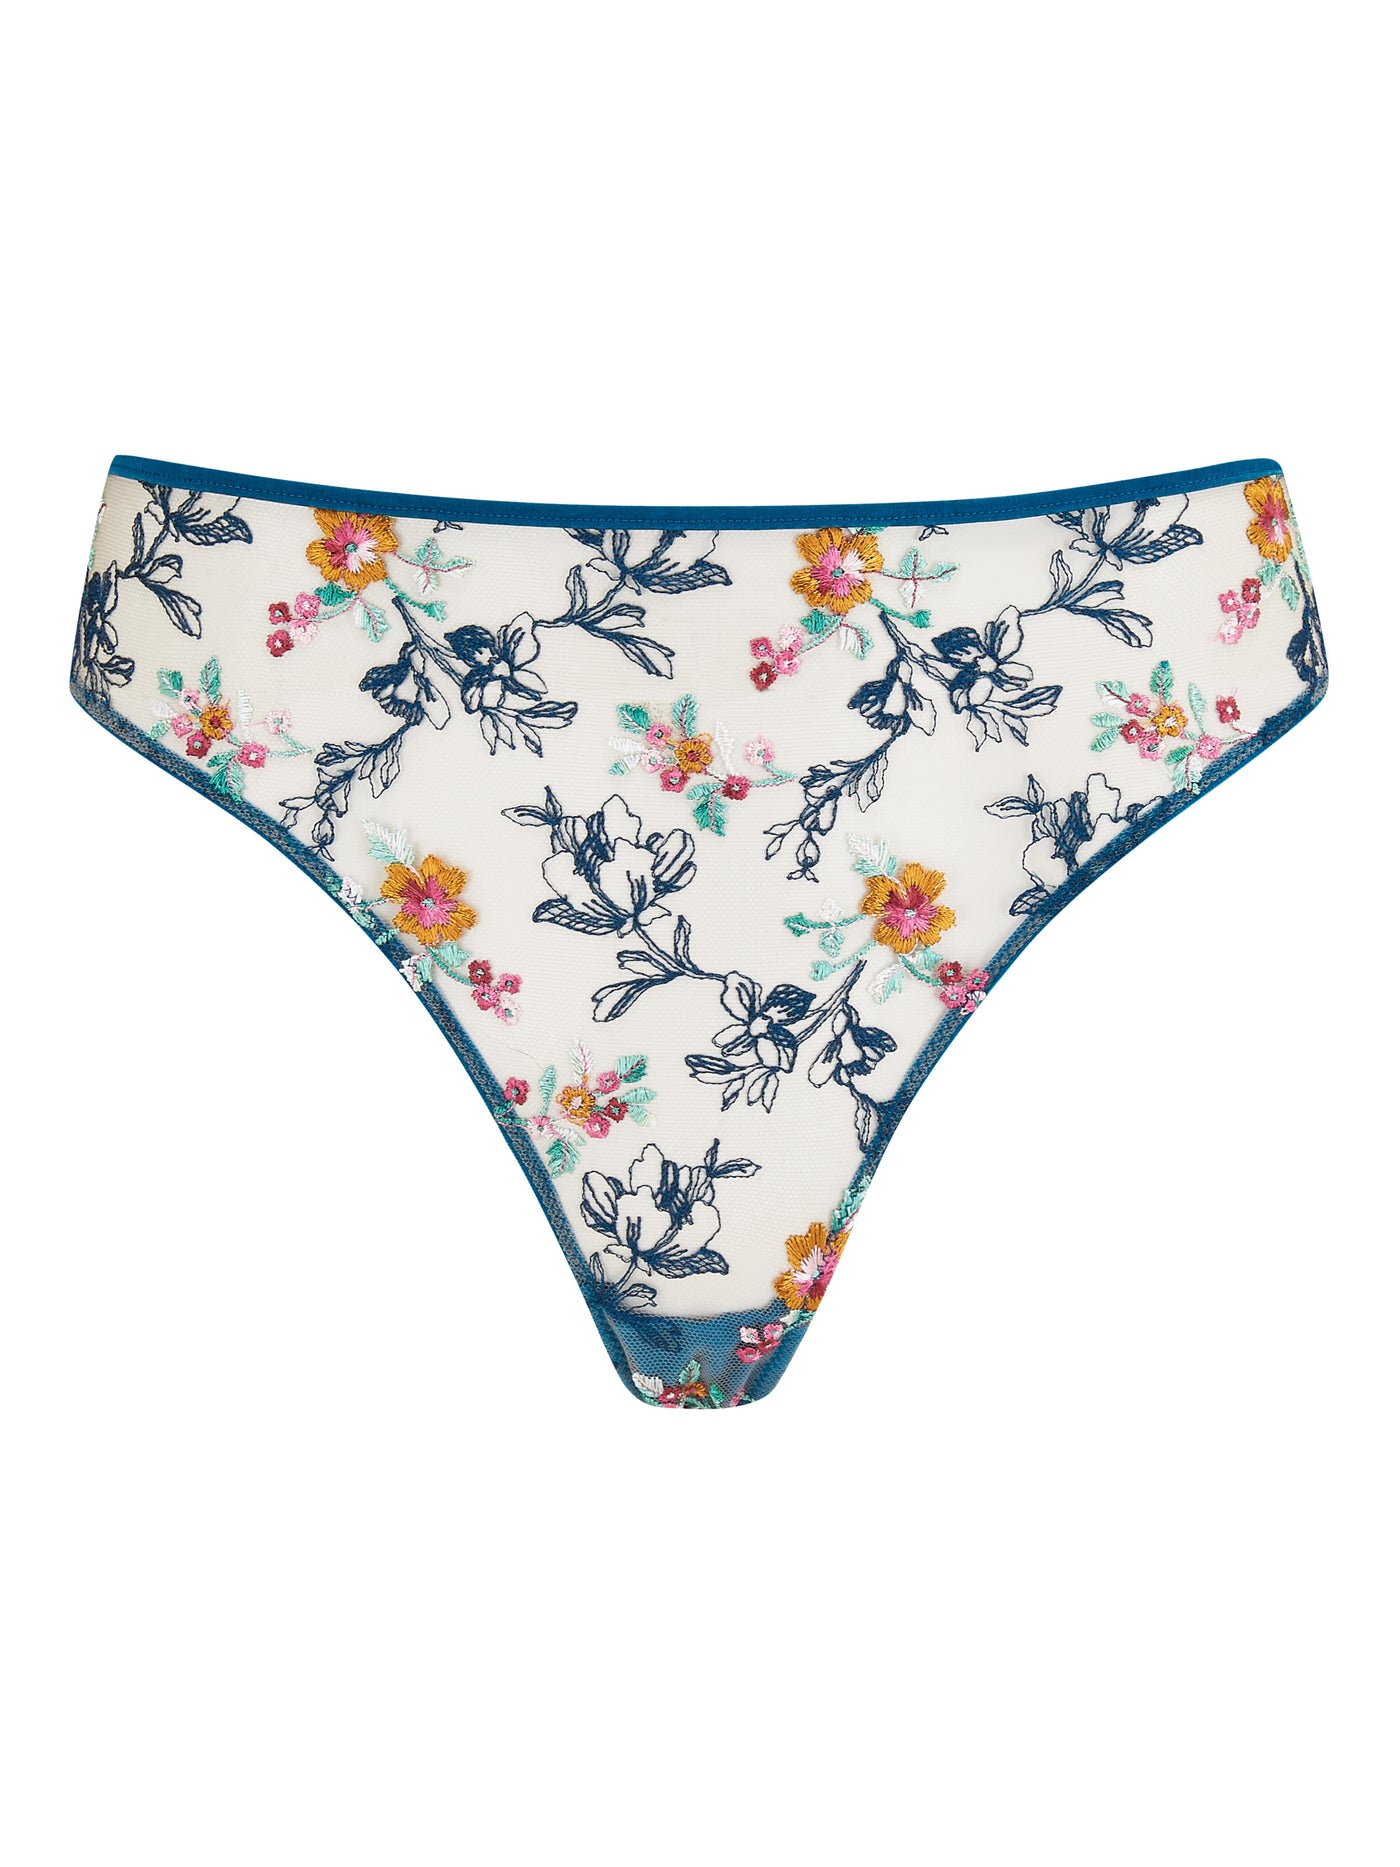 Evelyn cyan floral embroidered thong